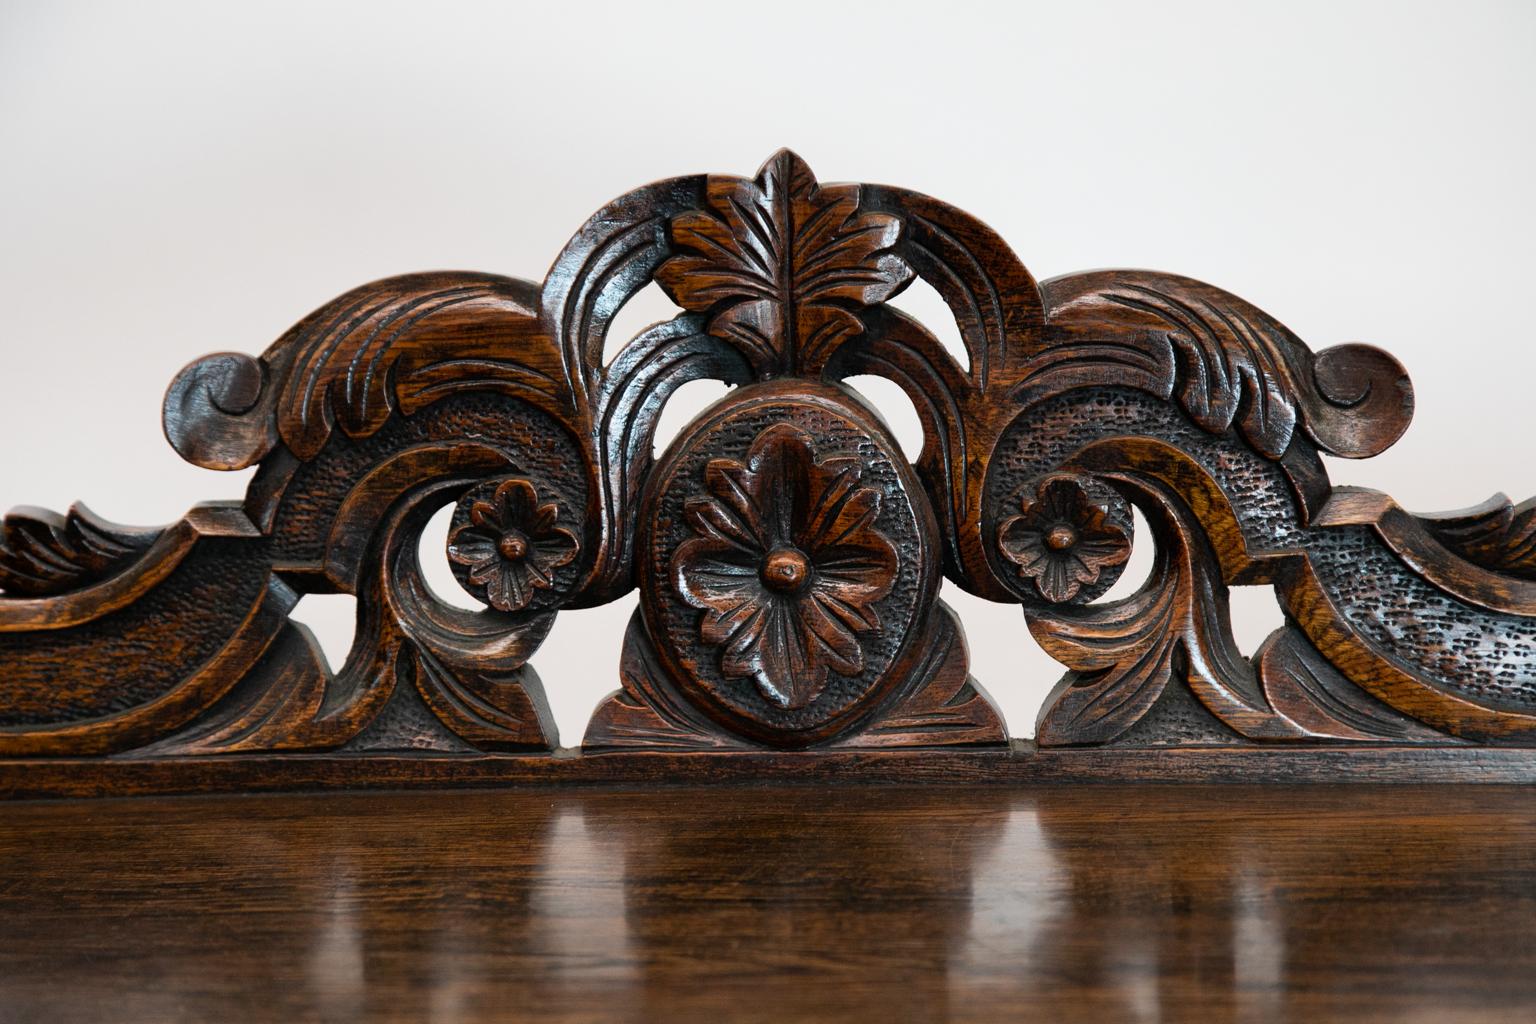 Carved two-tier English shelf cupboard, the crest and sides of the top are carved with floral arabesques and have fluted mushroom finials. The shelf edges are carved and stipled. The doors have carved baskets of fruit that are carved in very high